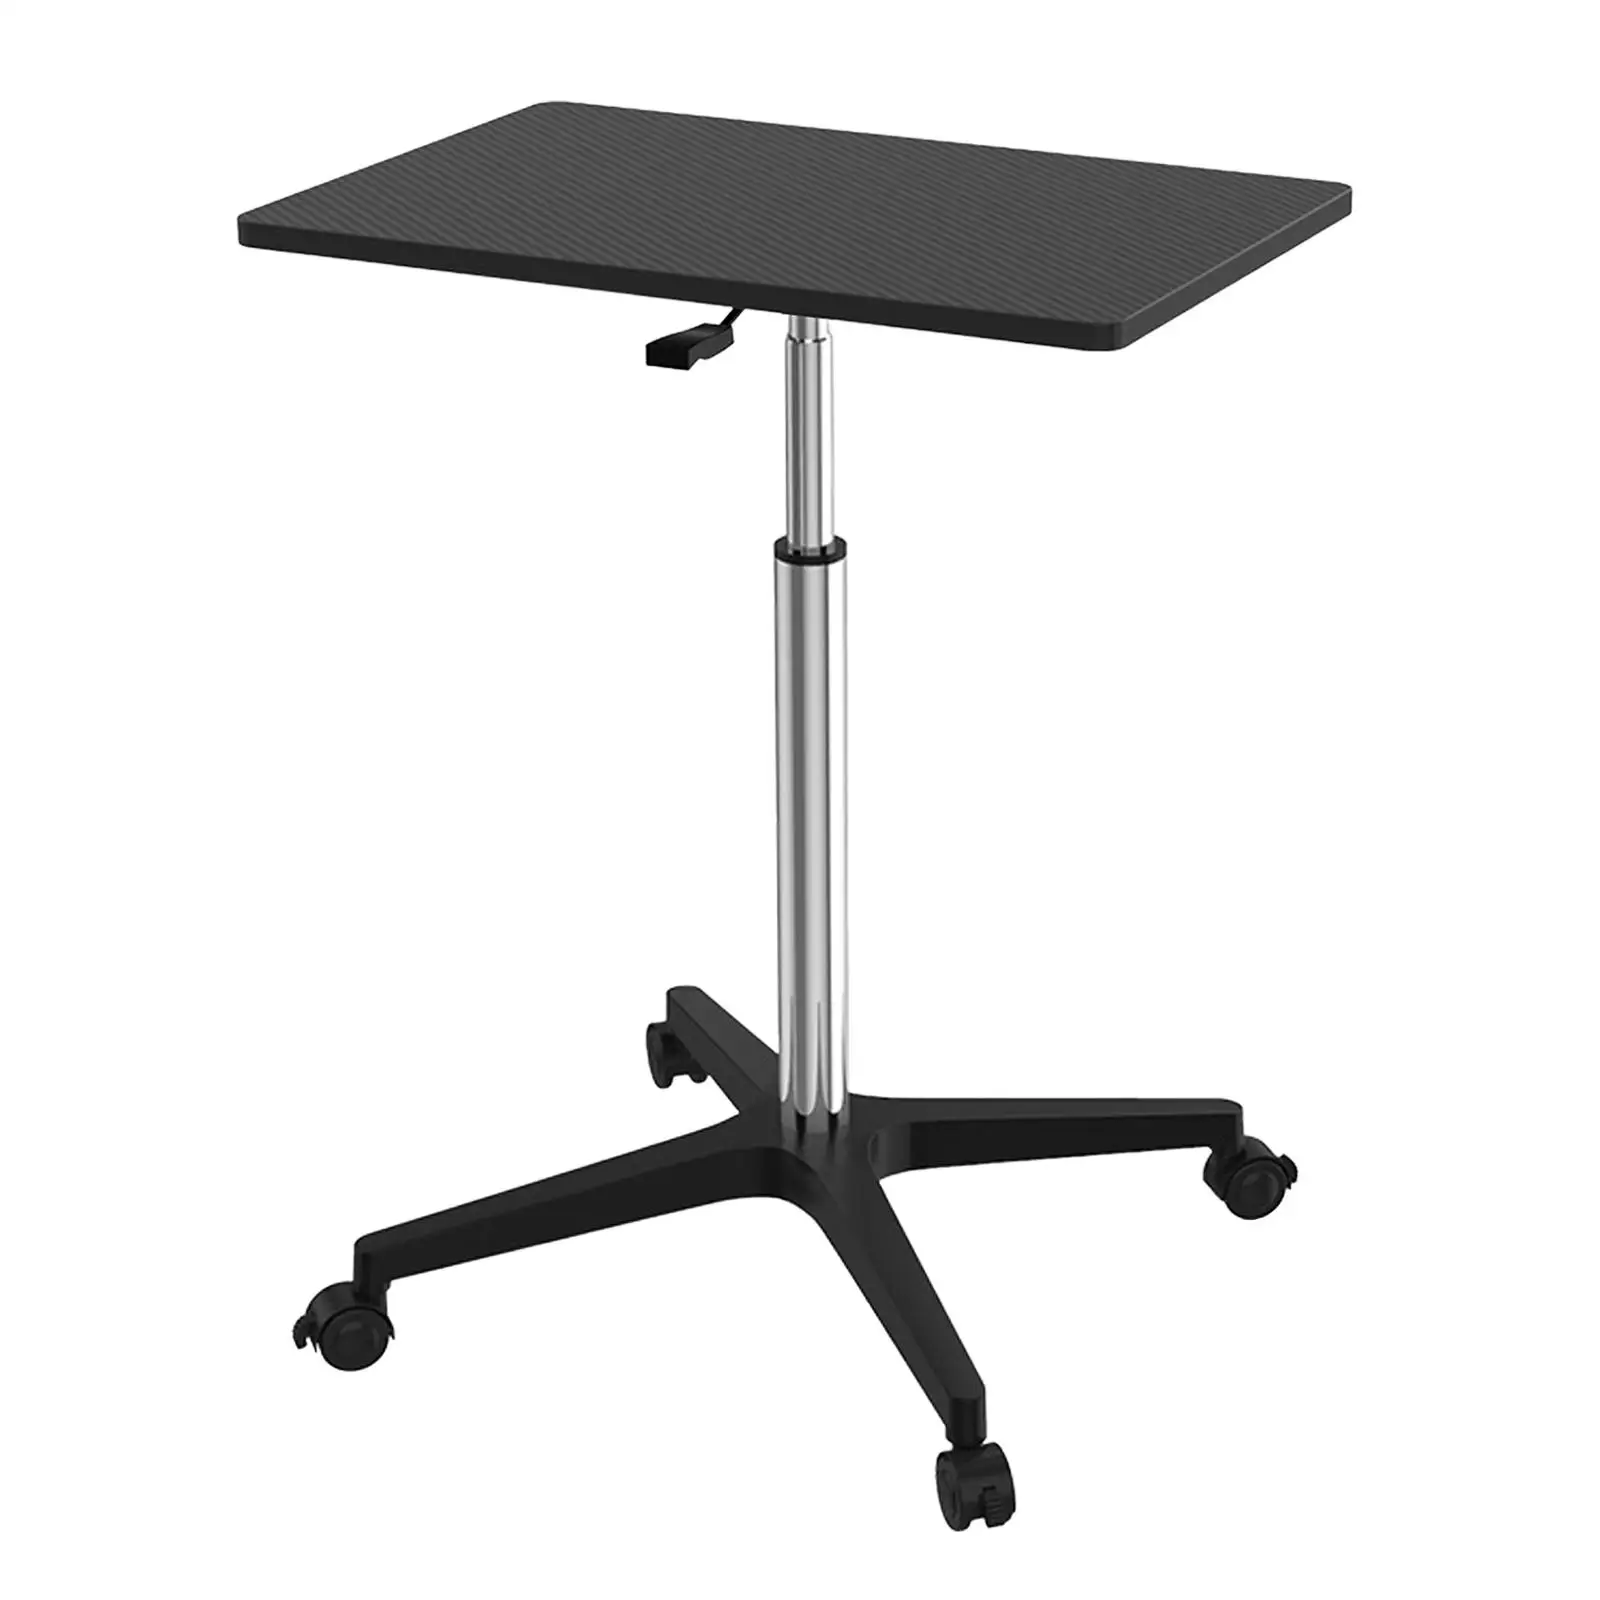 Height Adjustable Mobile Laptop Standing Desk with Lockable Wheels Tabletop 60Cmx39cm Work Table for Home Office Multi Purpose